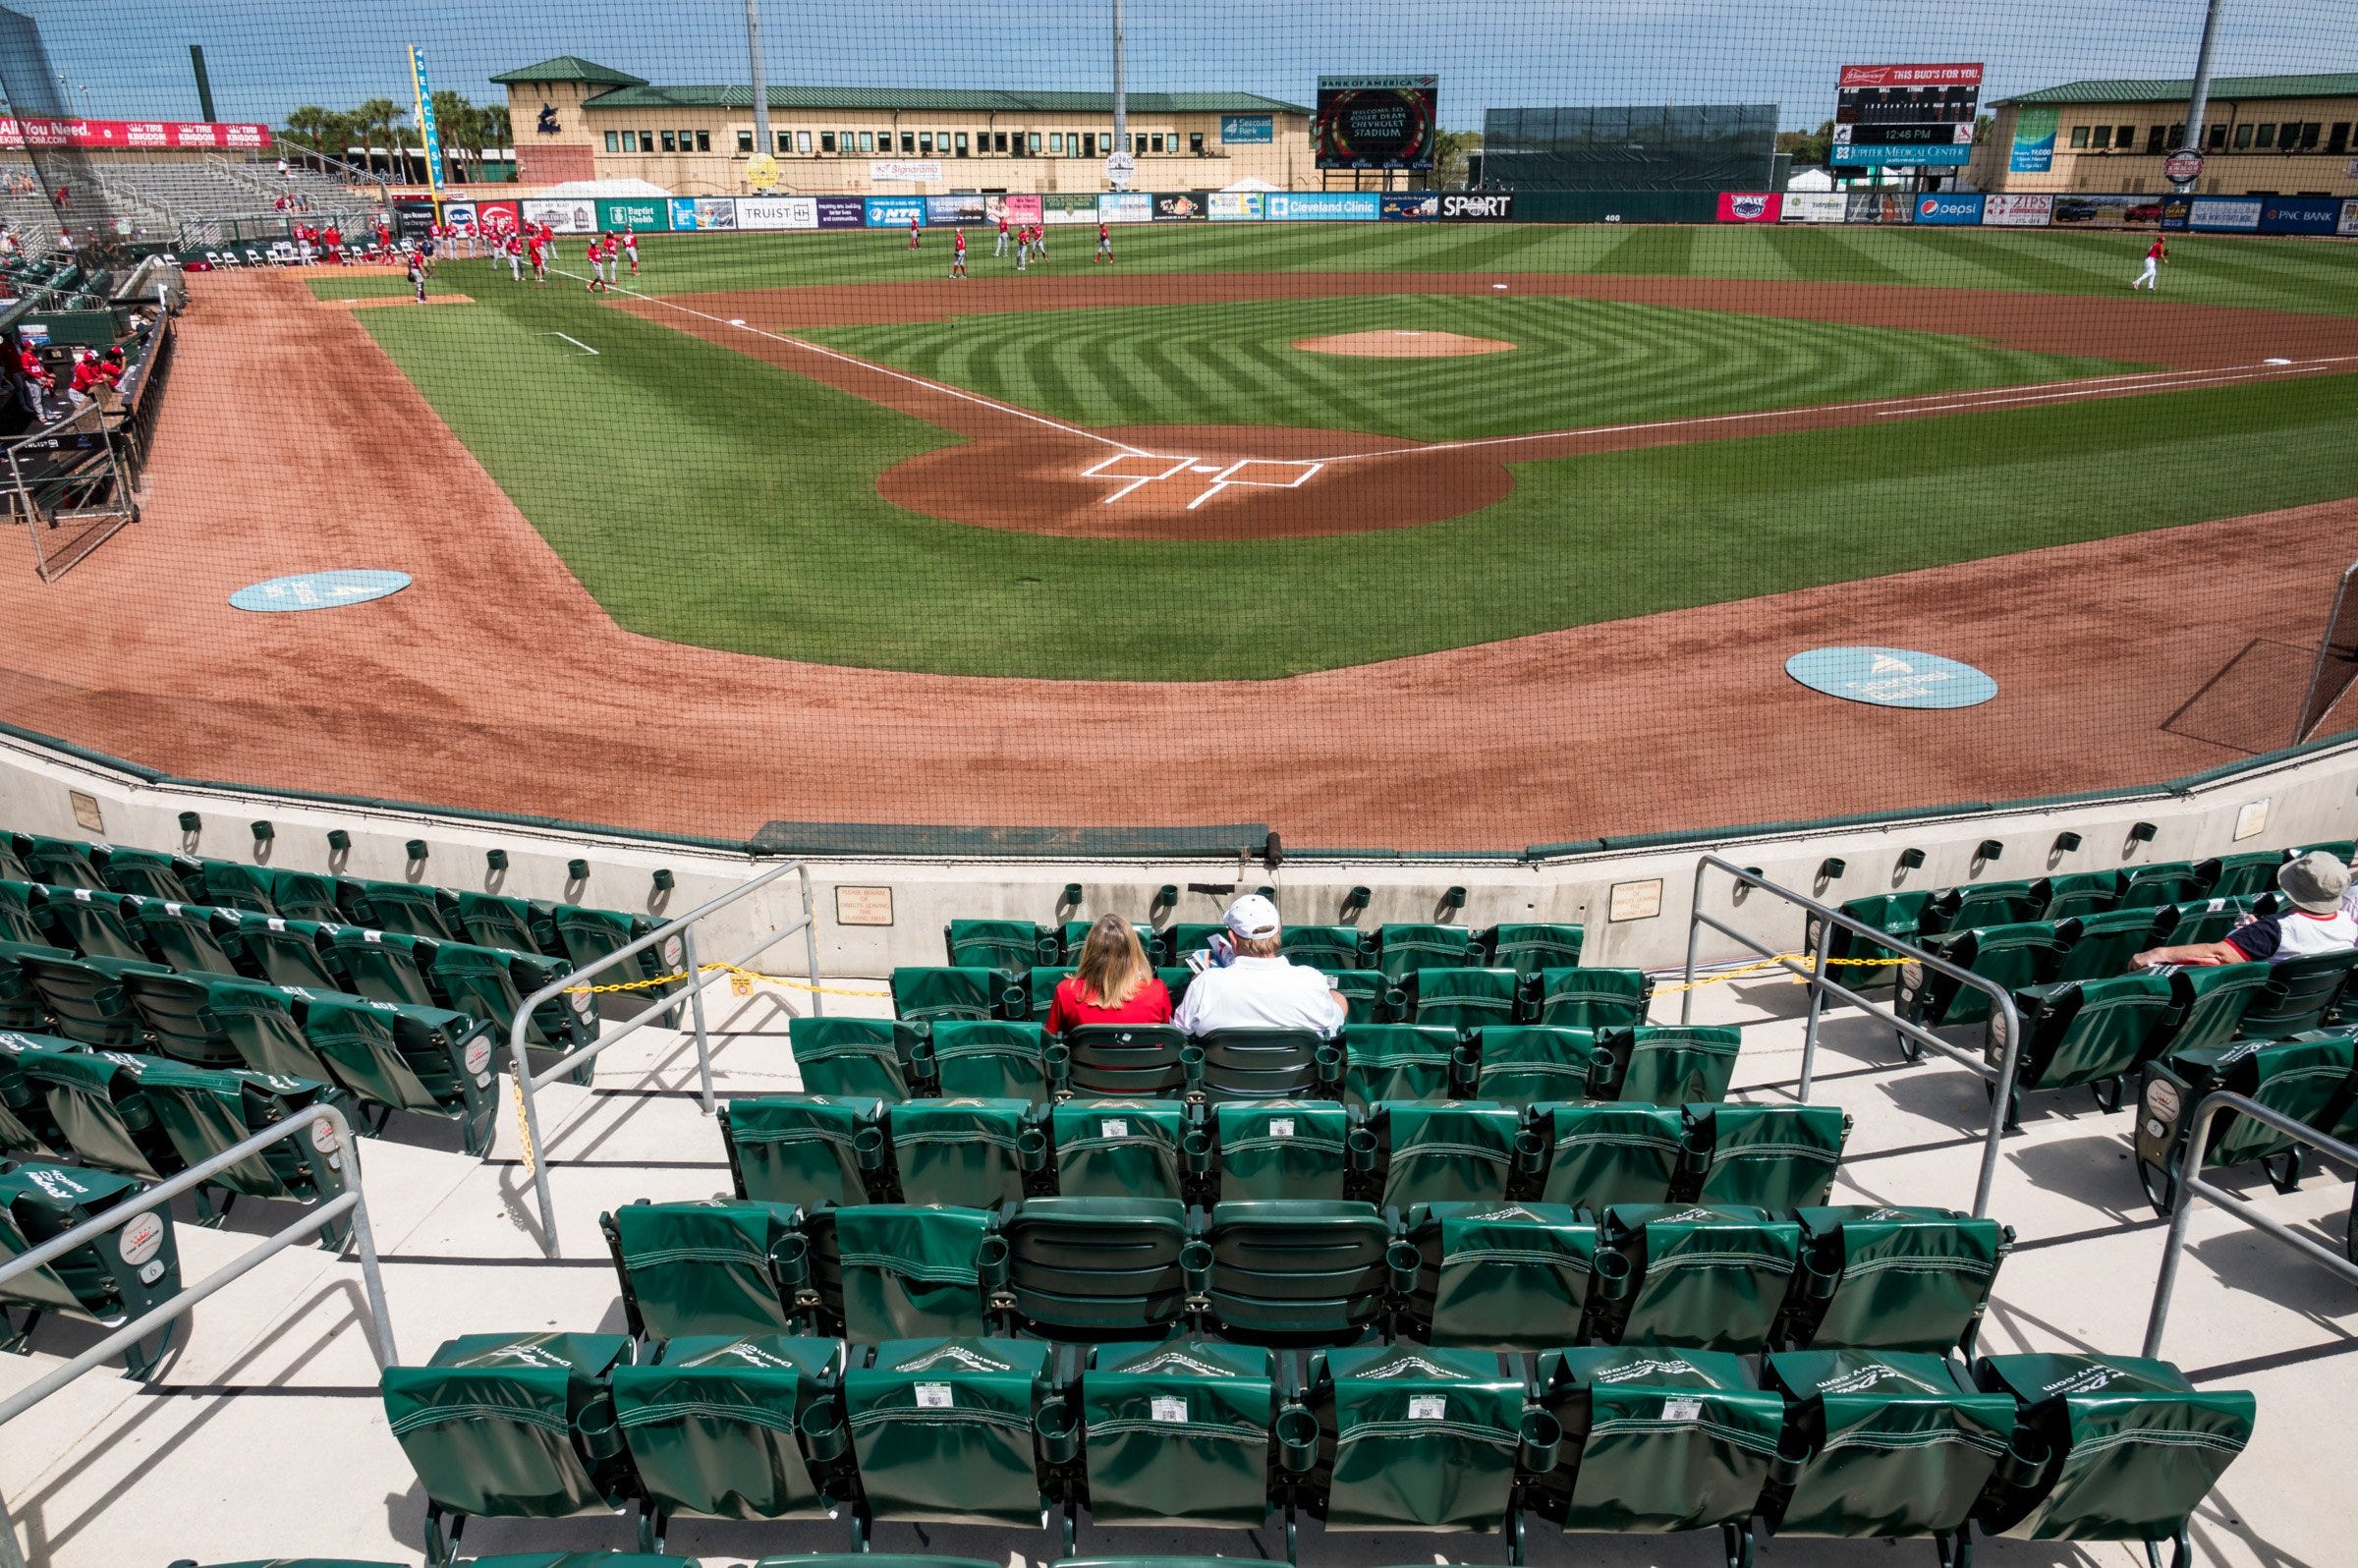 Mlb Spring Training 2022 Schedule Will Lockout Interrupt Major League Baseball Spring Training In Florida?